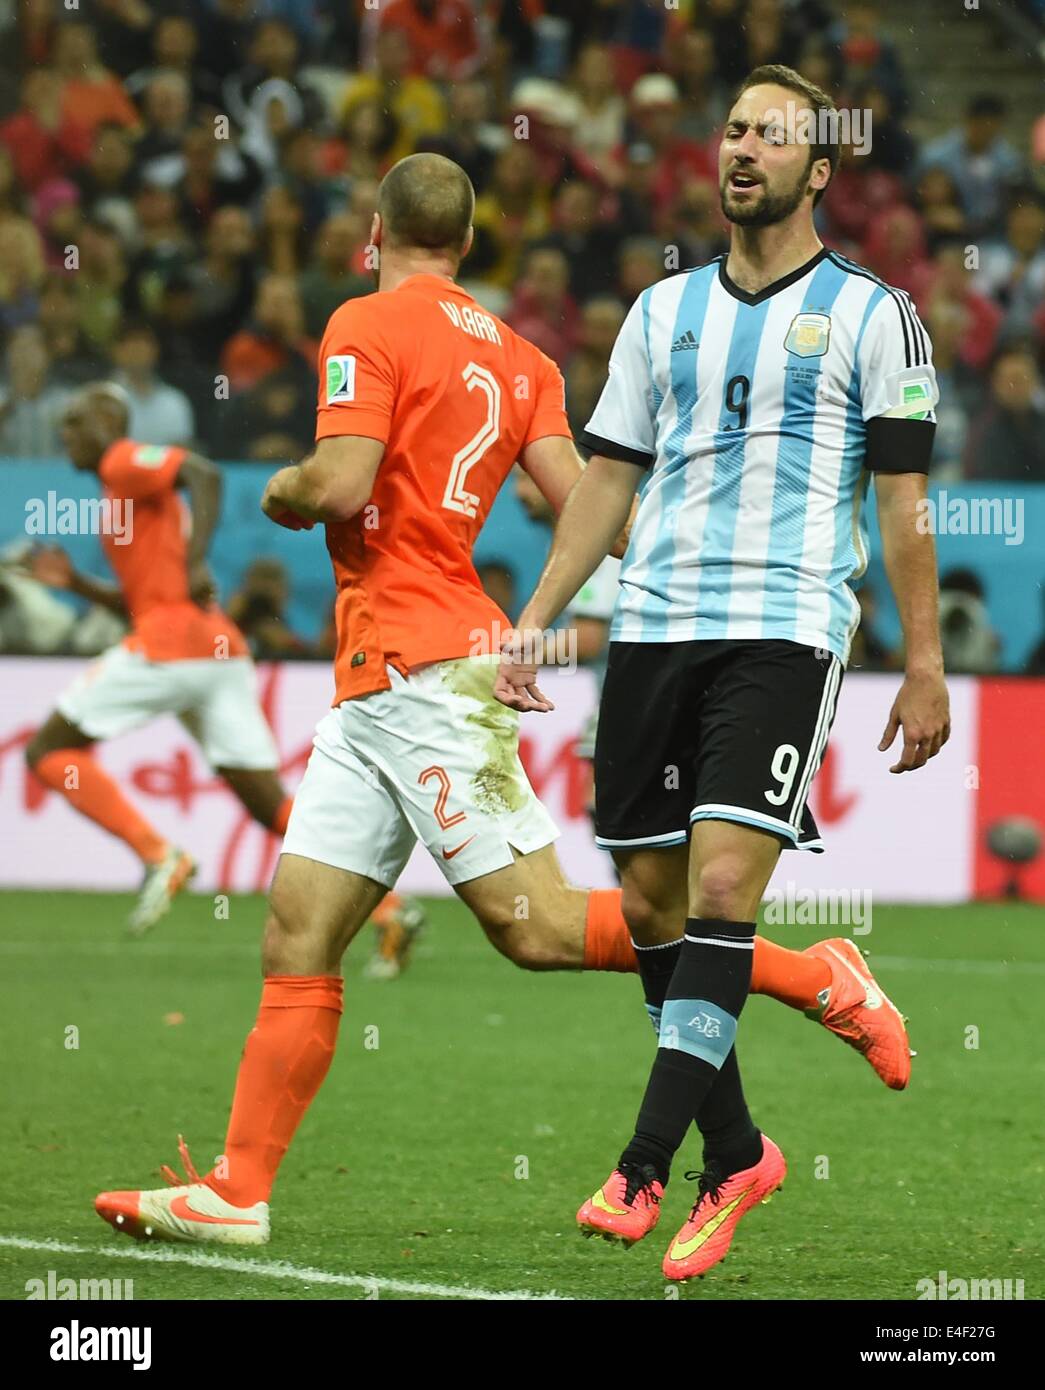 Sao Paulo, Brazil. 9th July, 2014. Argentina's Gonzalo Higuain reacts during a semifinal match between Netherlands and Argentina of 2014 FIFA World Cup at the Arena de Sao Paulo Stadium in Sao Paulo, Brazil, on July 9, 2014. Credit:  Wang Yuguo/Xinhua/Alamy Live News Stock Photo